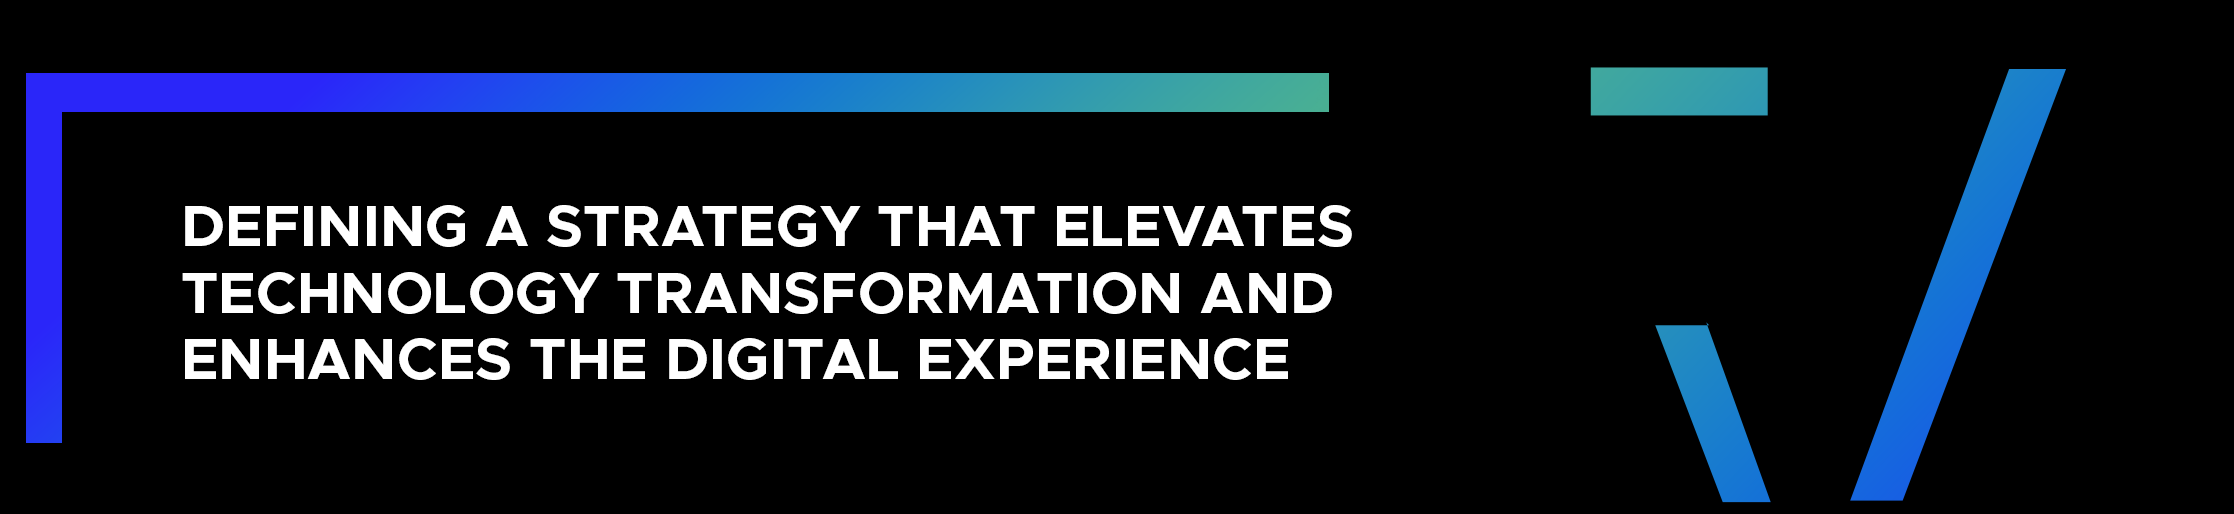 Defining a strategy that elevates technology transformation and enhances the digital experience